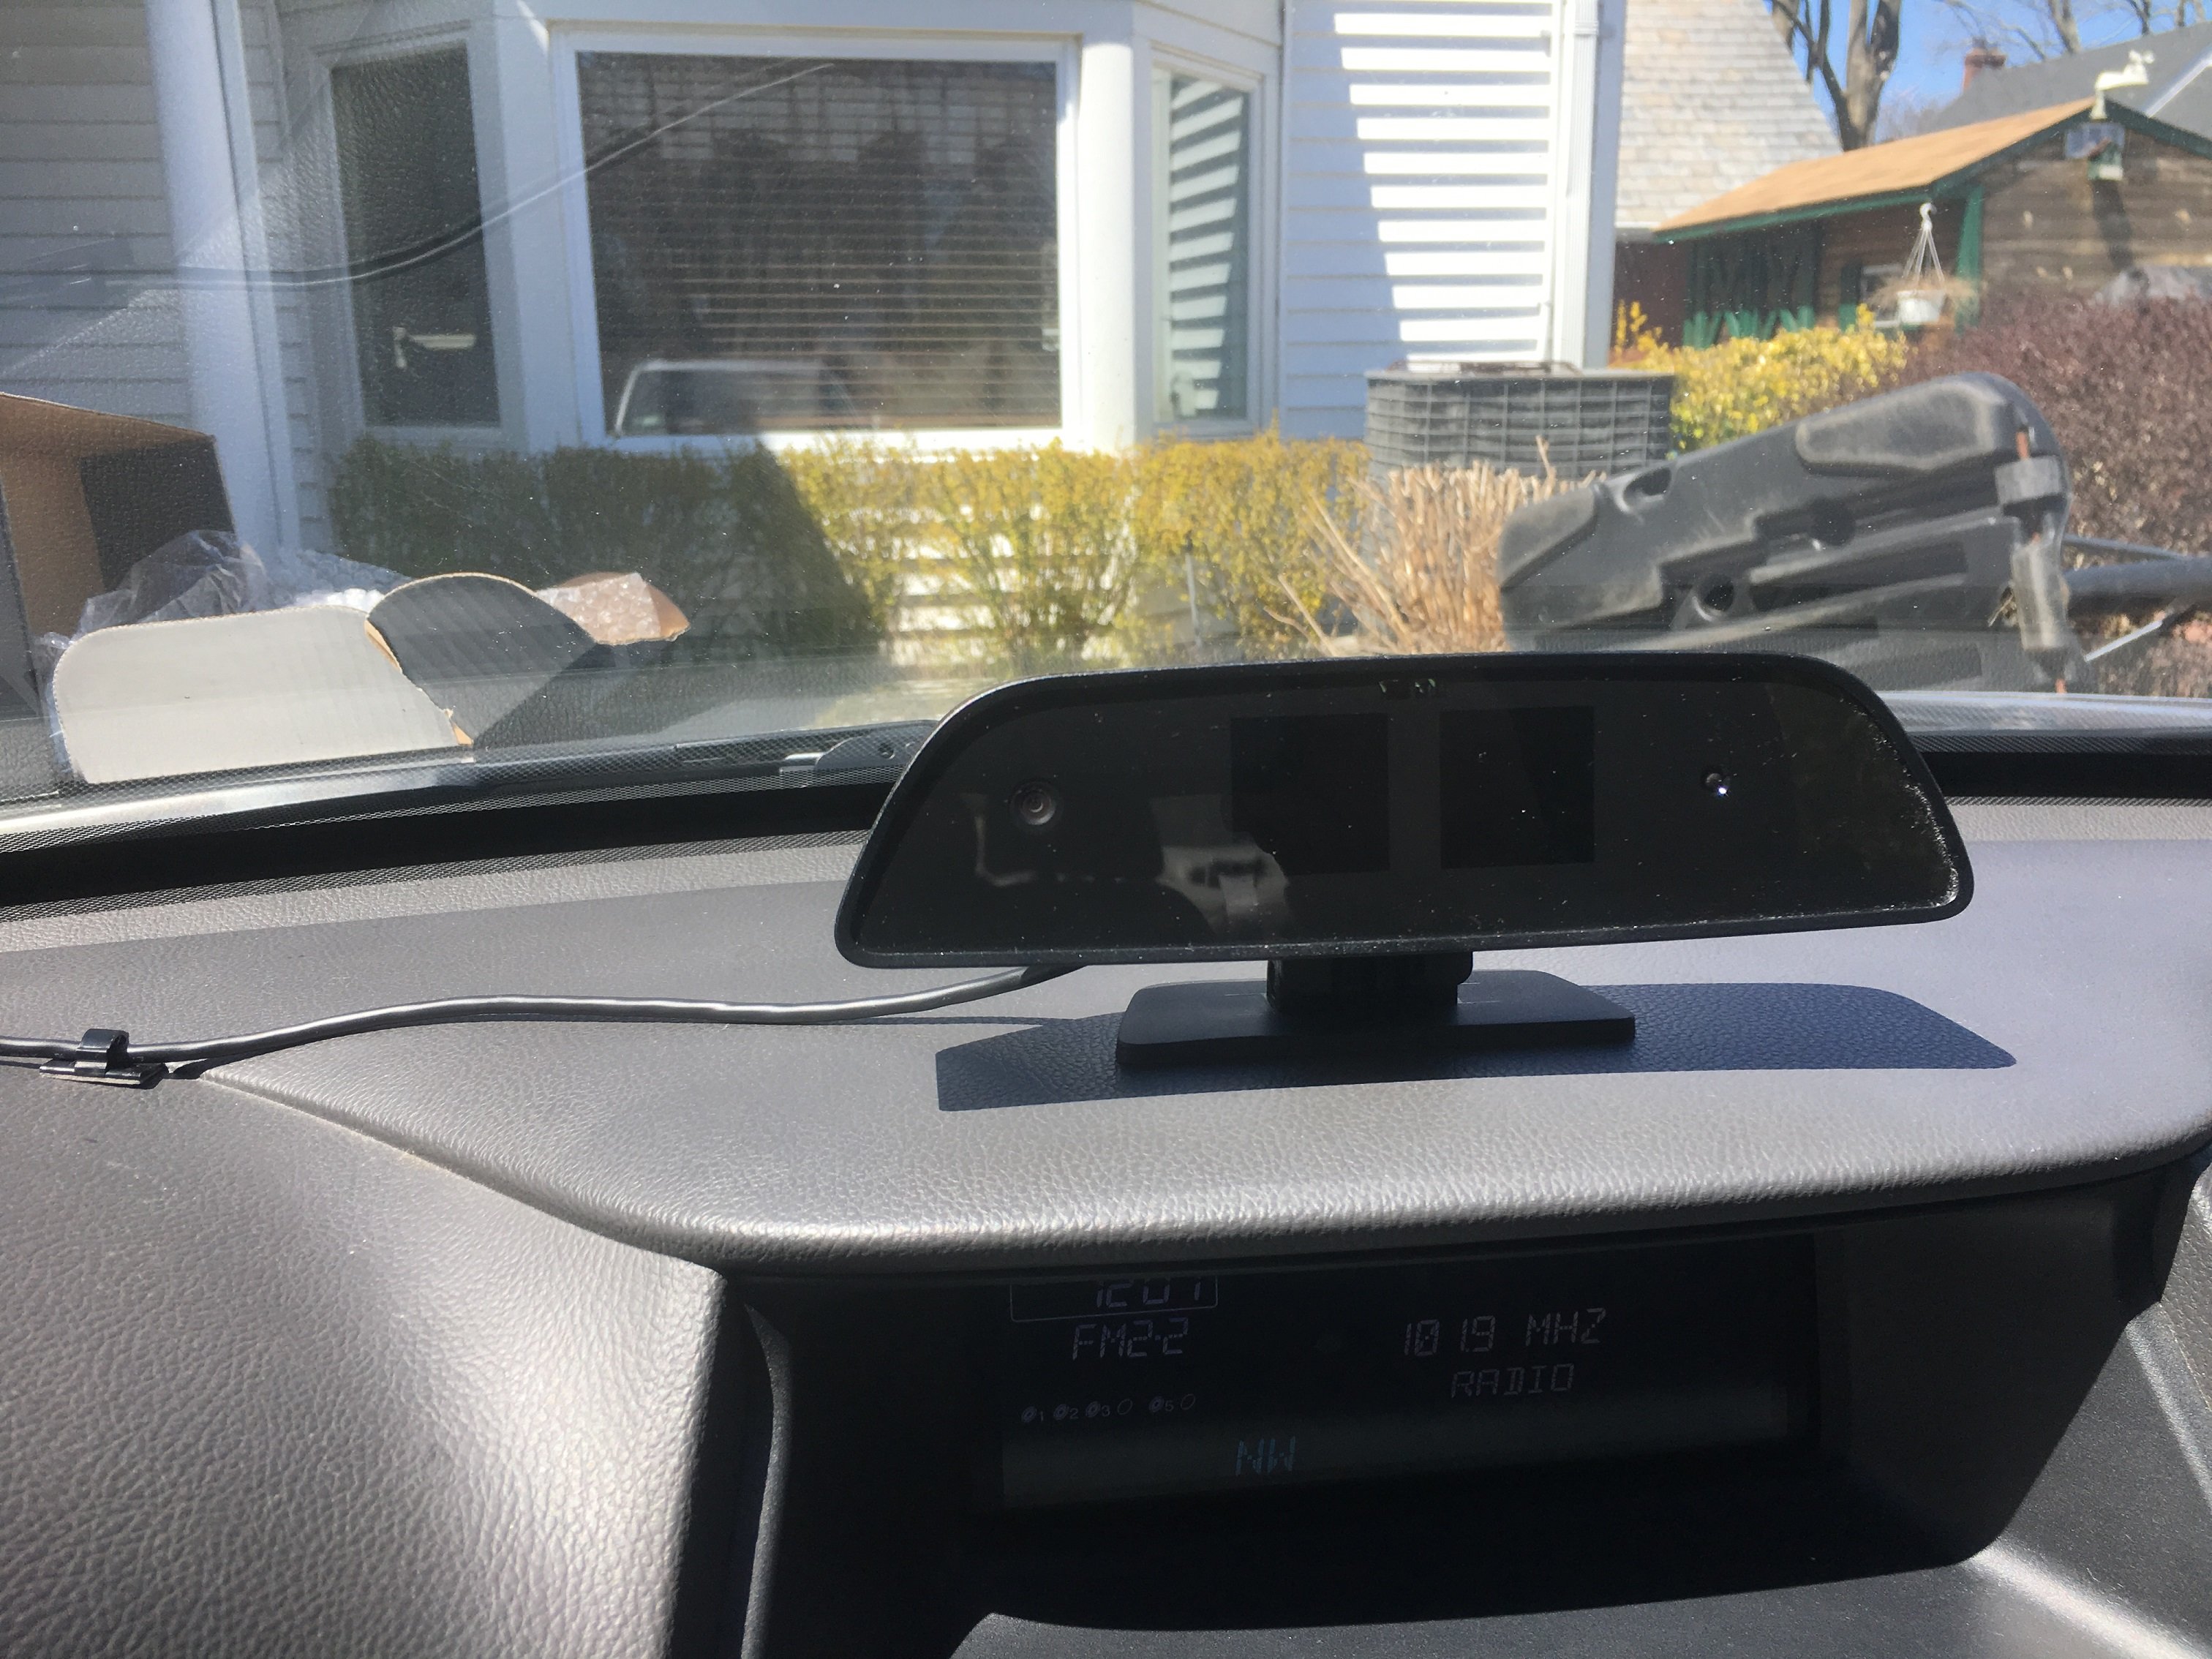 Why you need a car security camera - Raven Connected